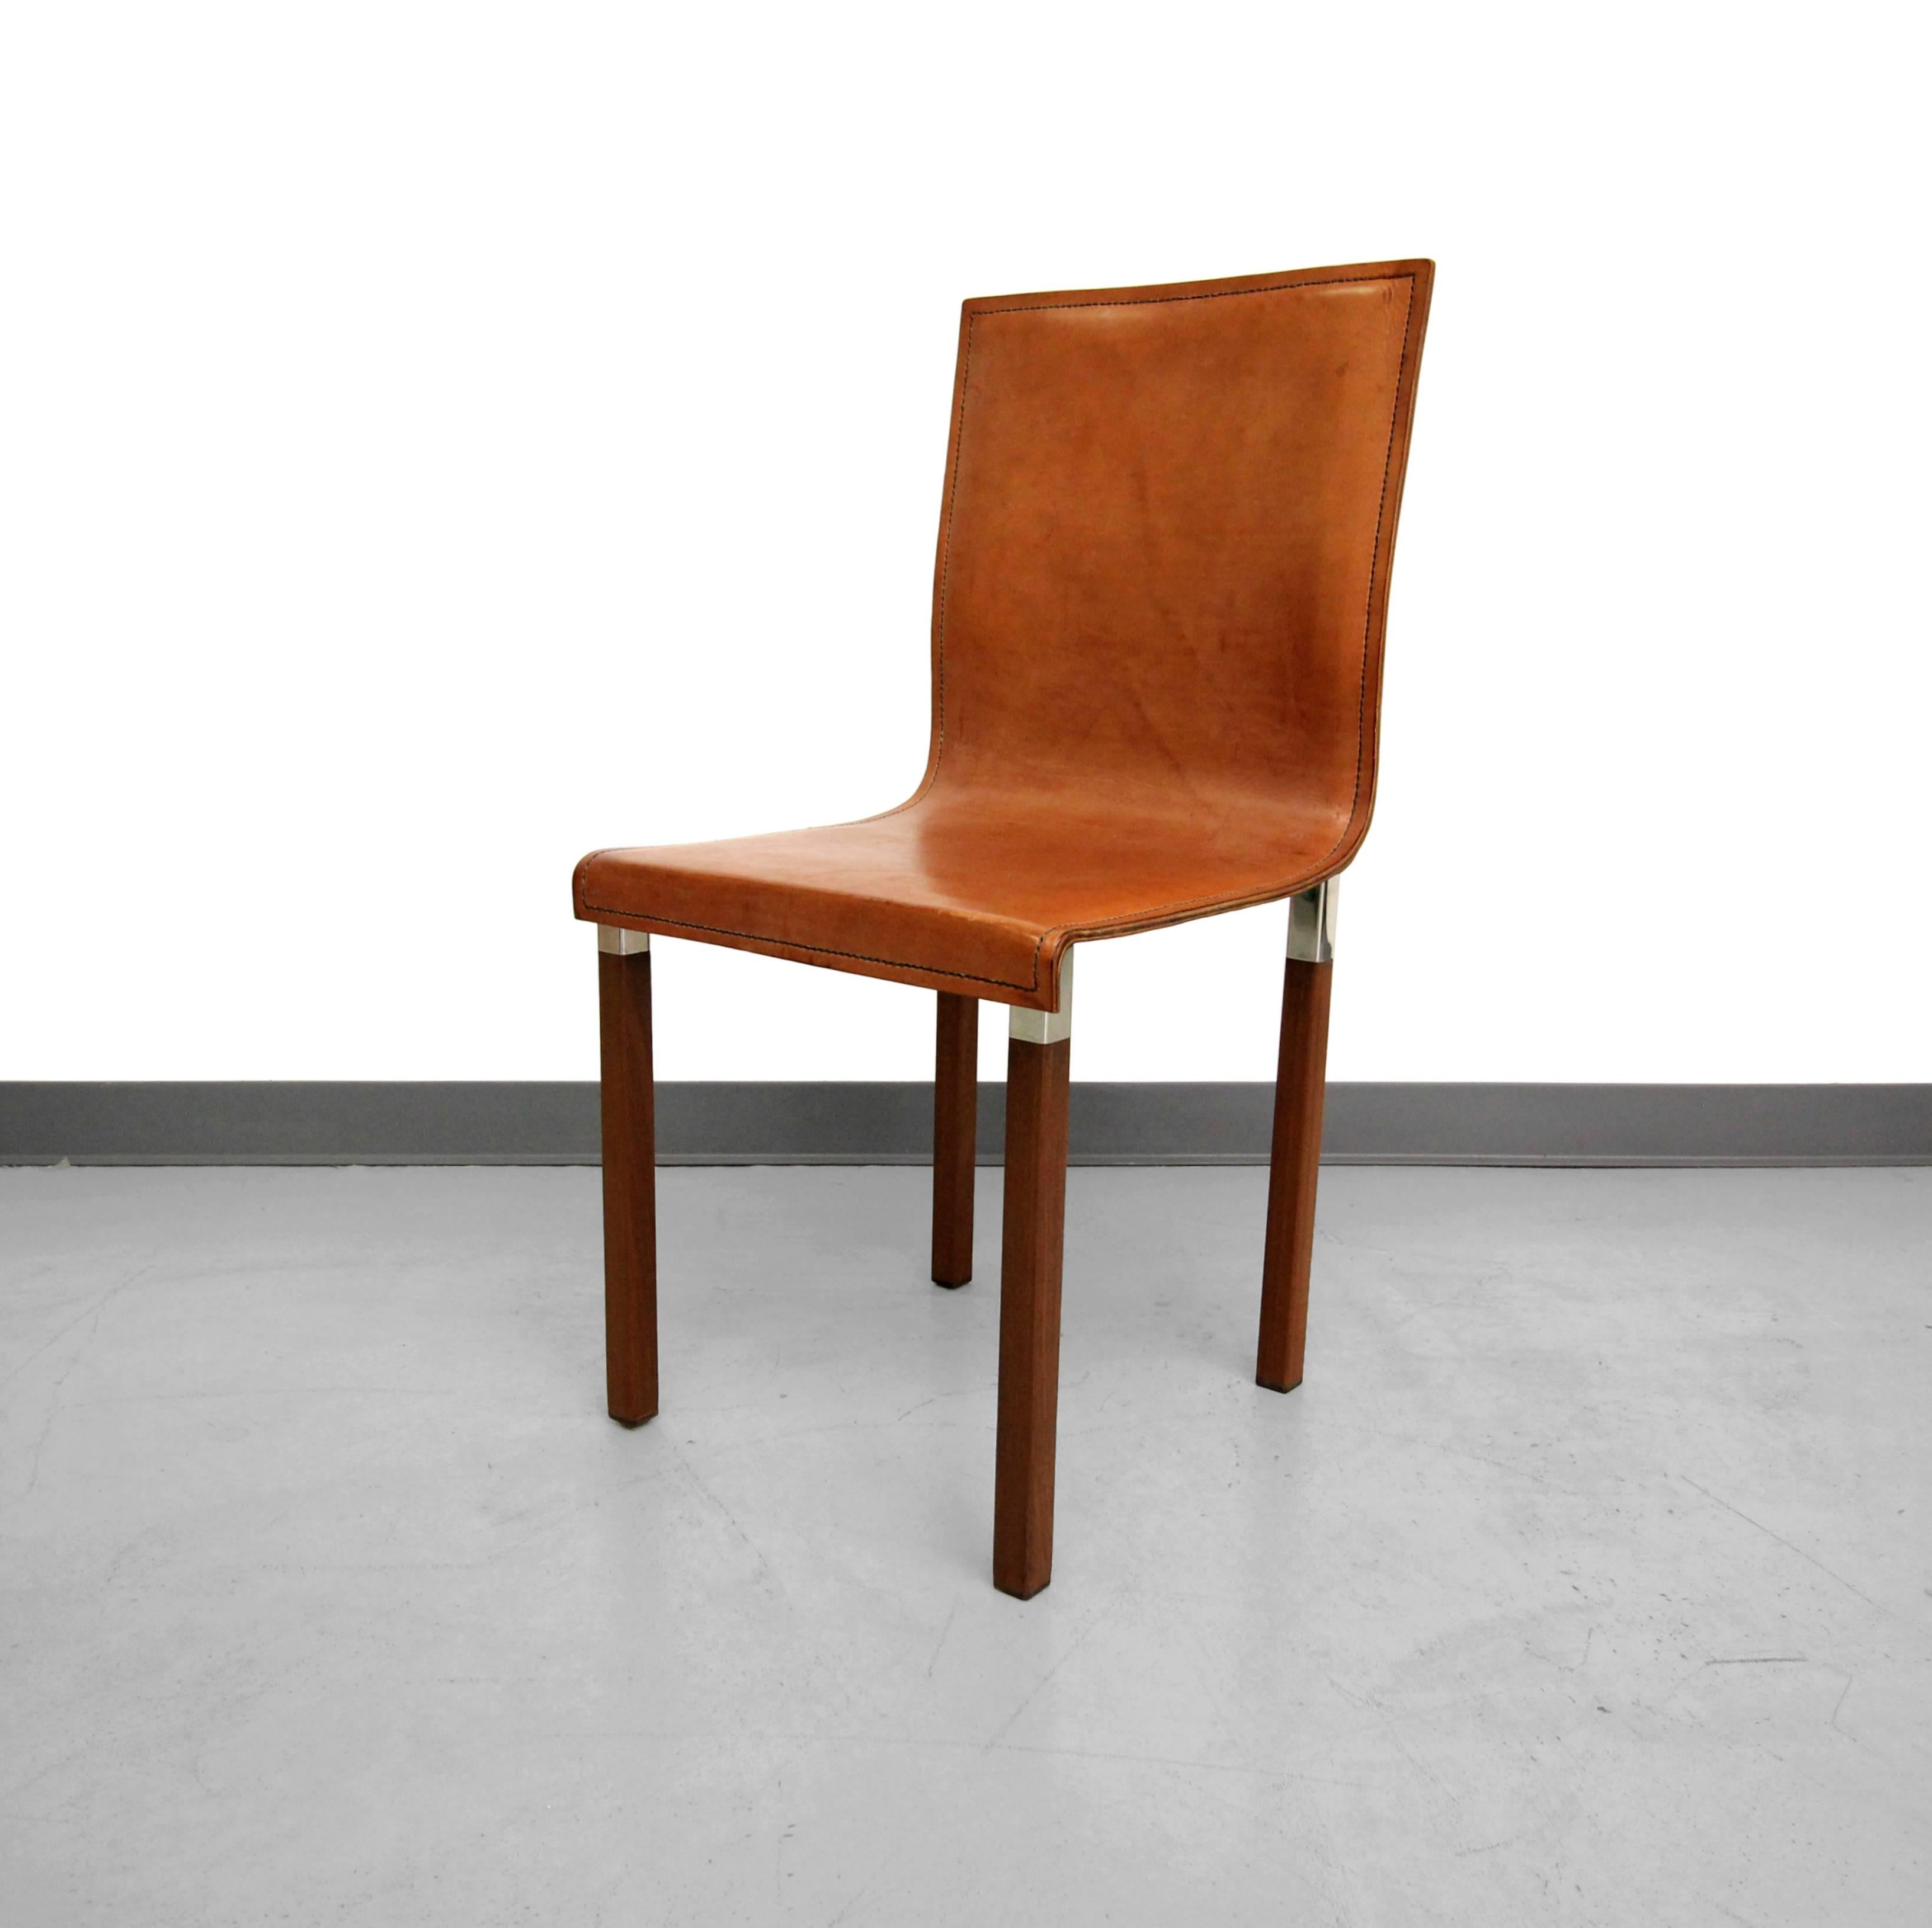 modern industrial dining chairs